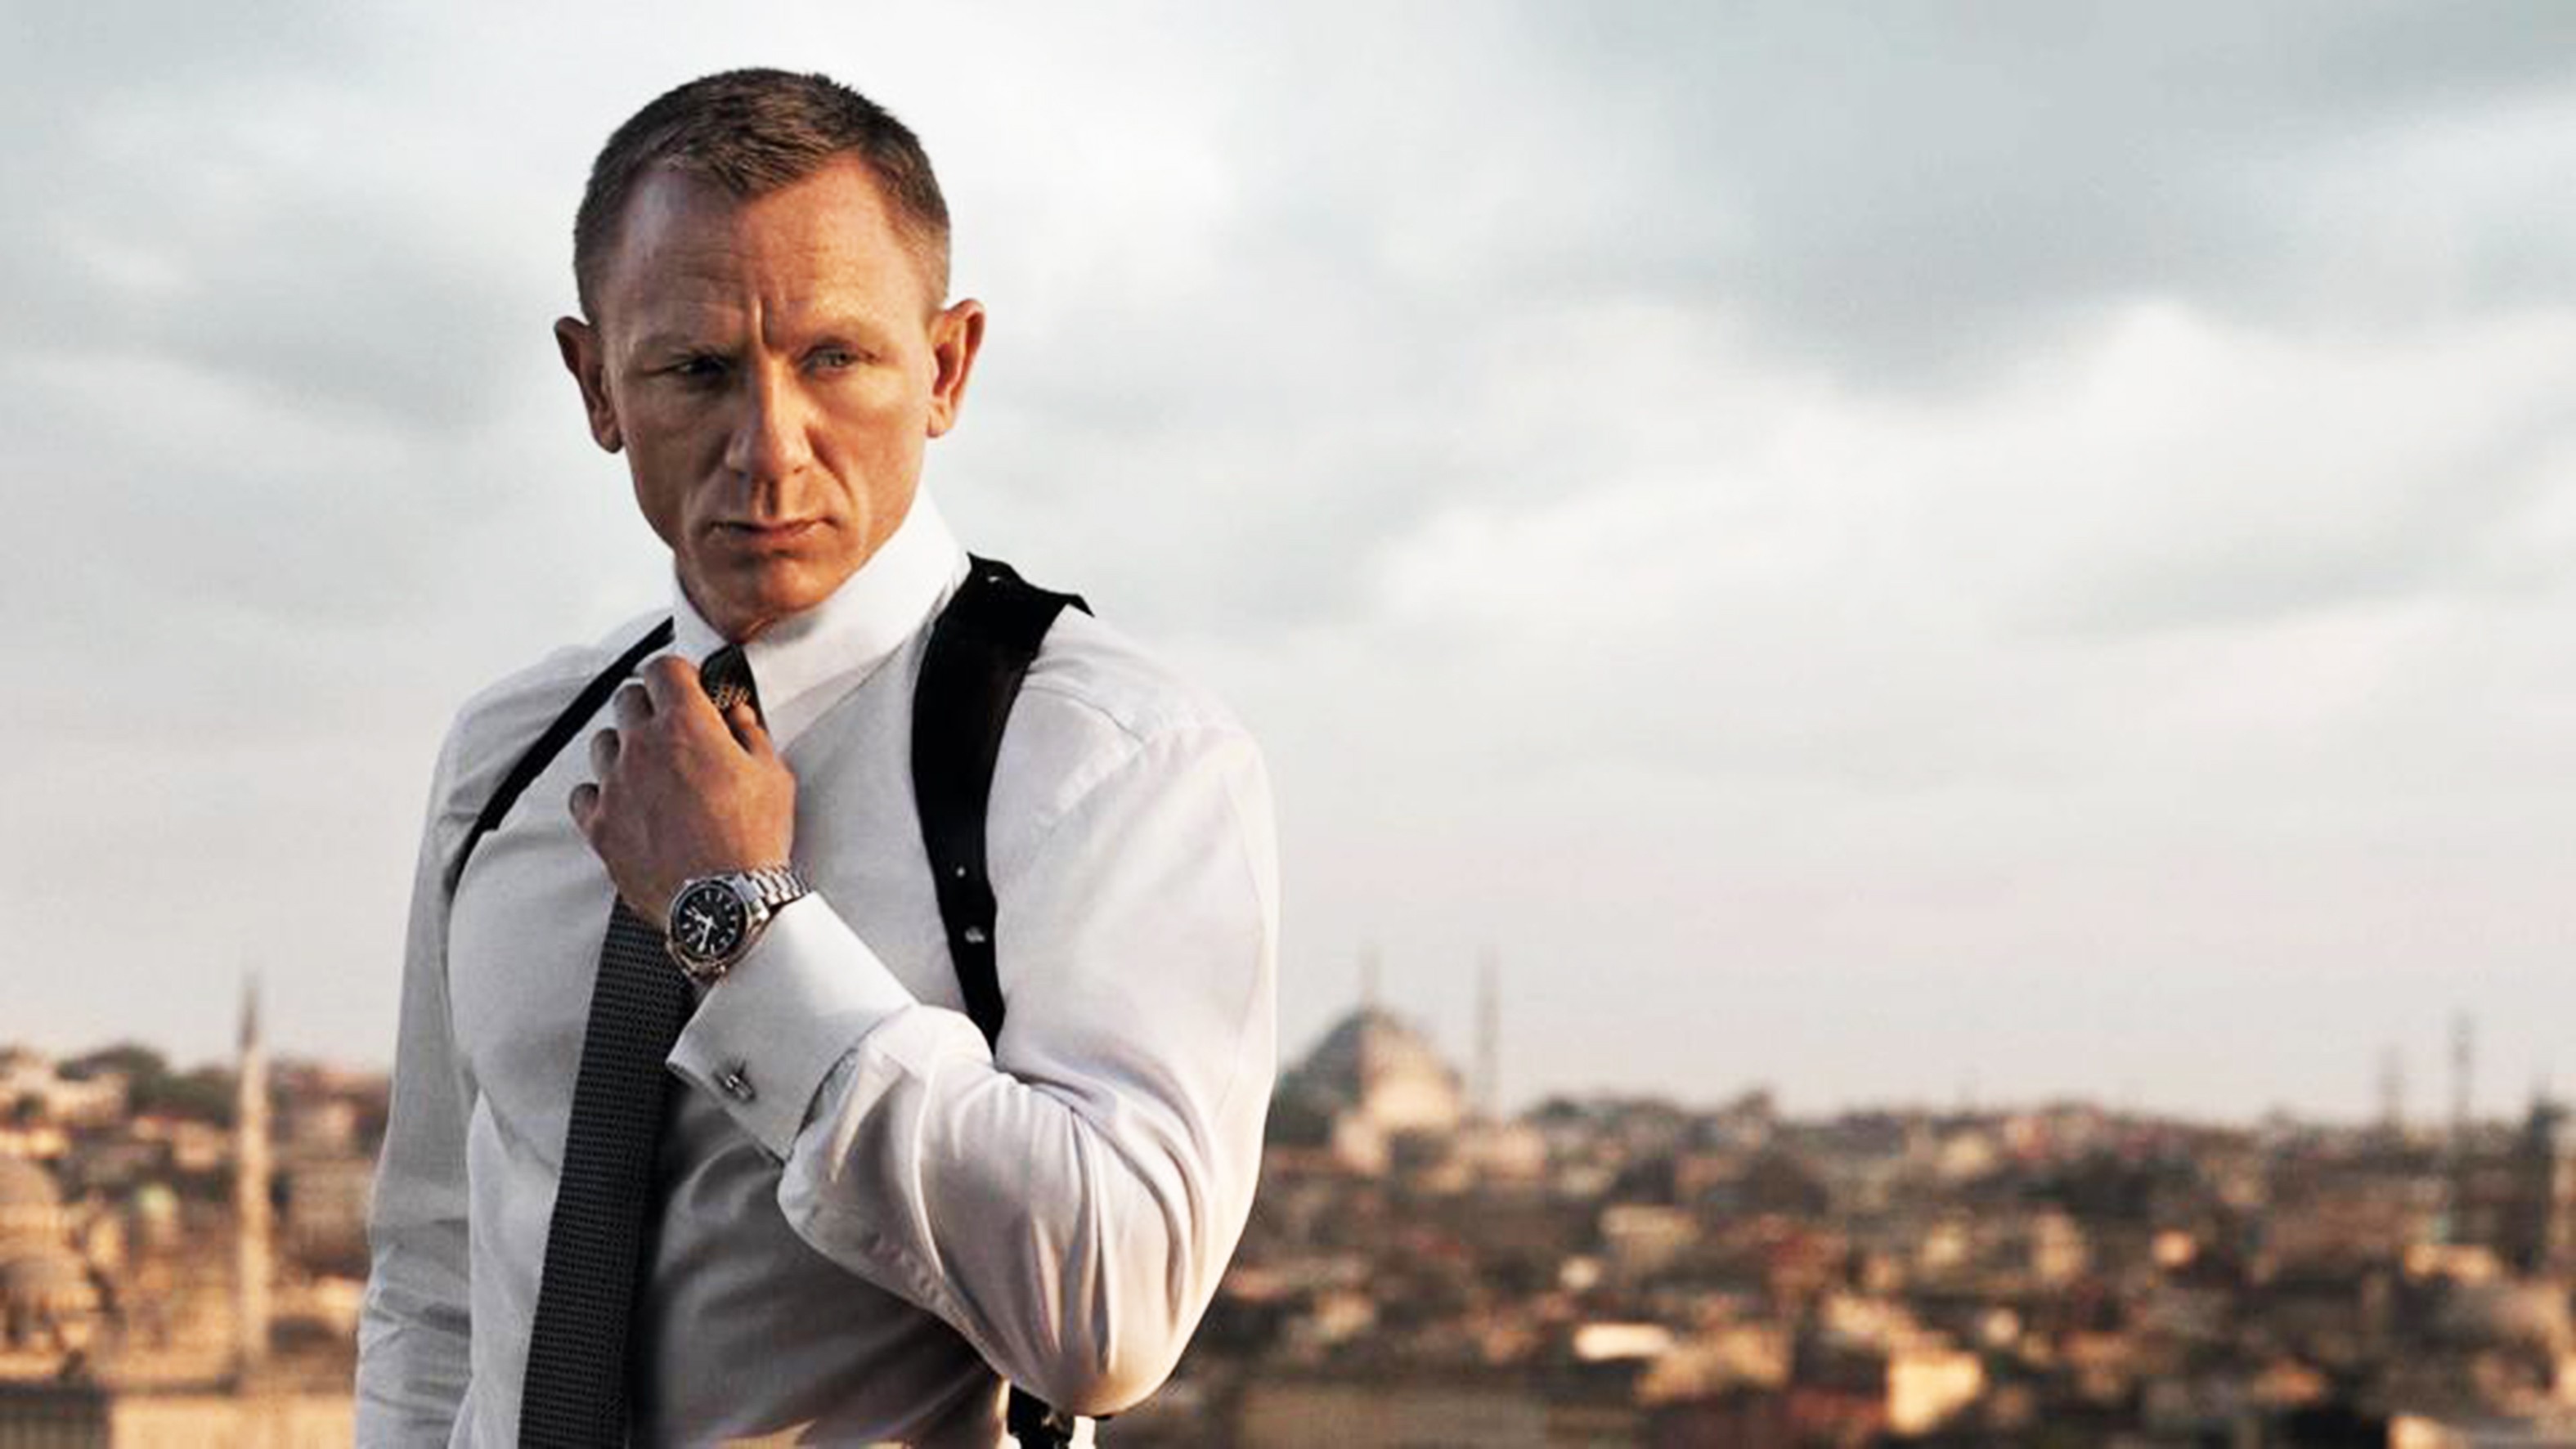 Daniel Craig’s fifth Bond film, provisionally known as Bond 25, is scheduled for release in April 2020.